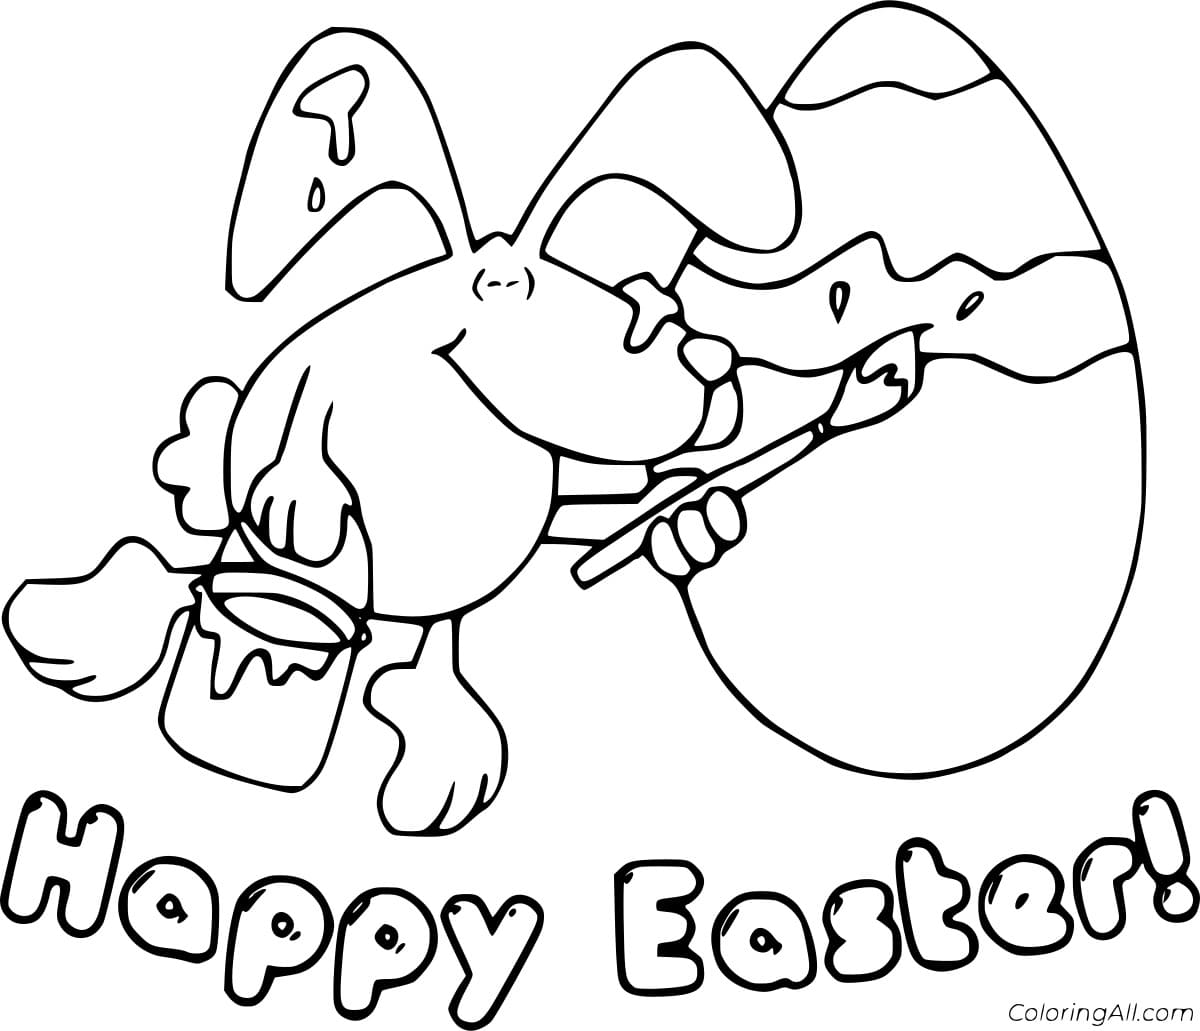 Happy Easter And The Painting Bunny For Children Coloring Page